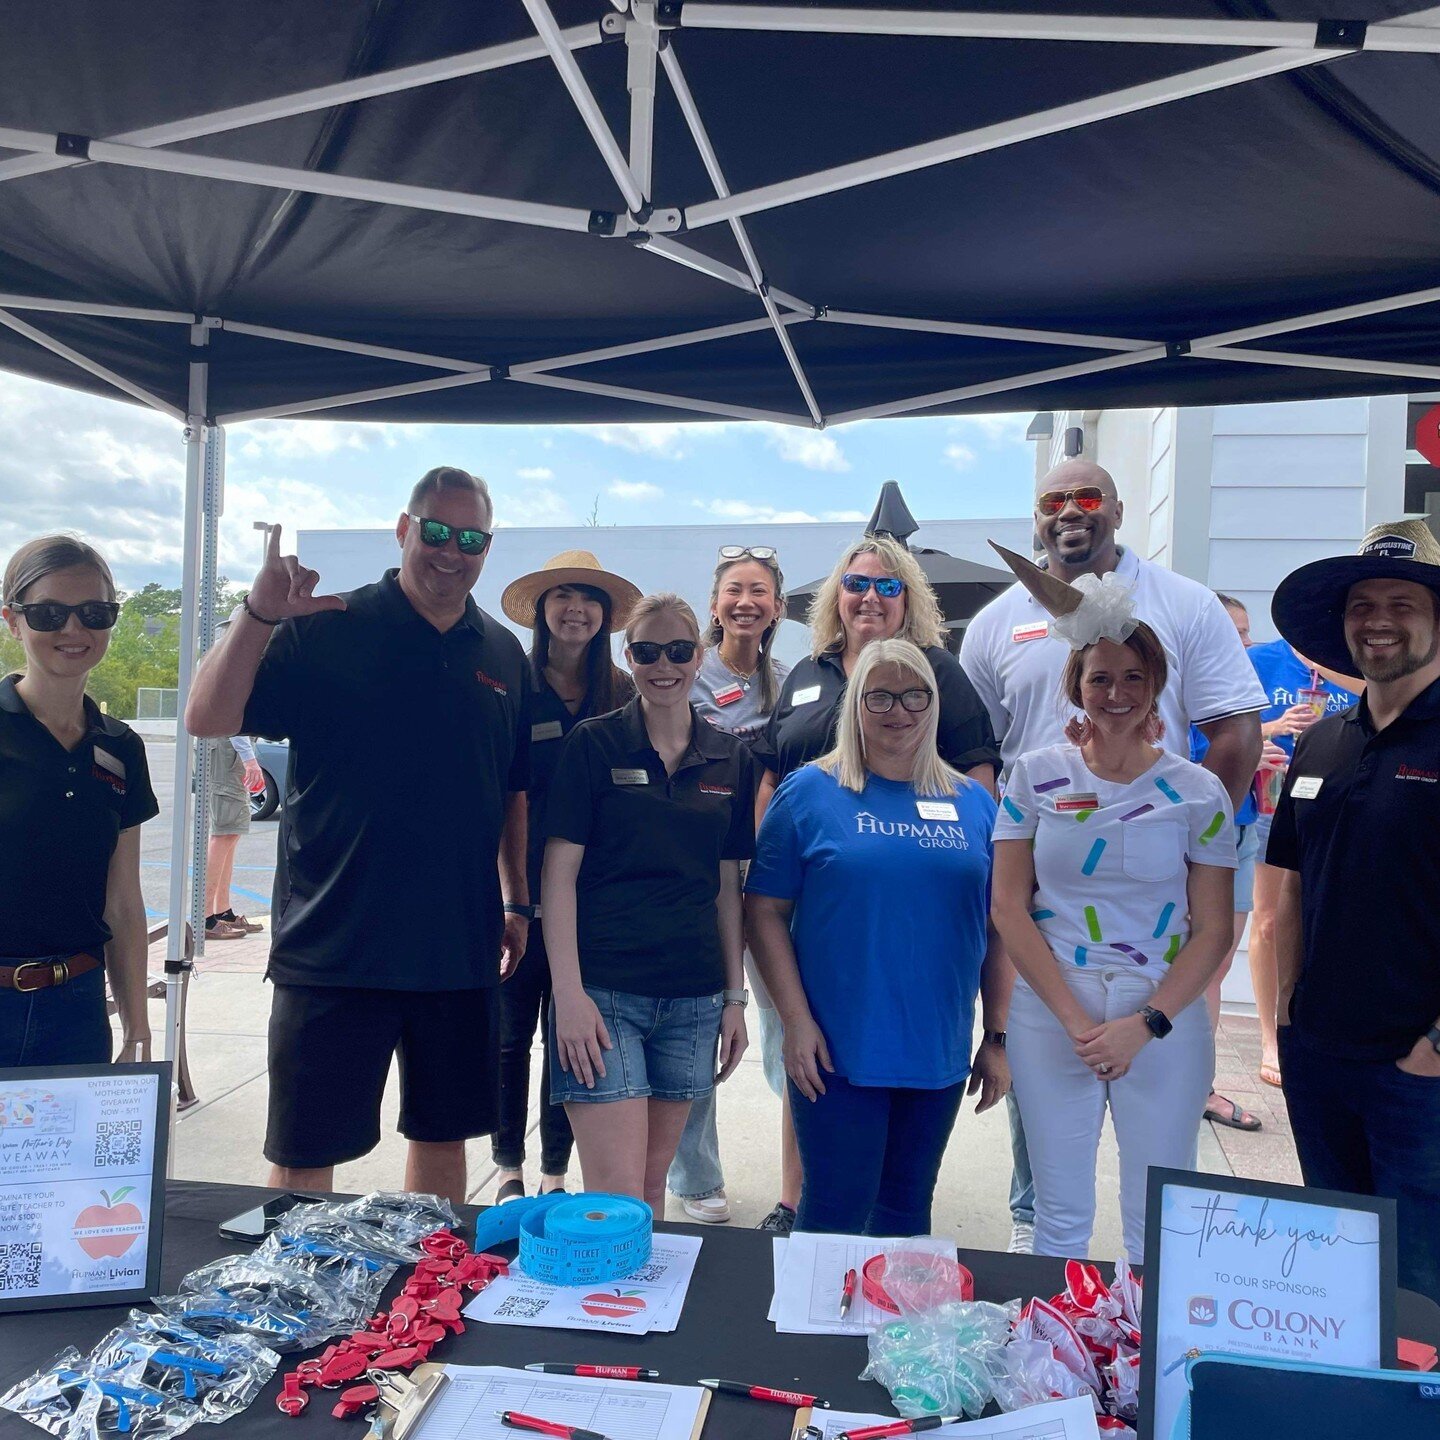 👉 Did you know that we had an amazing time seeing all of our clients and friends at the Ice Cream Stop yesterday? We appreciate you!👈 
Thank you to our sponsors Colony Bank and Coastline Heating and Air!